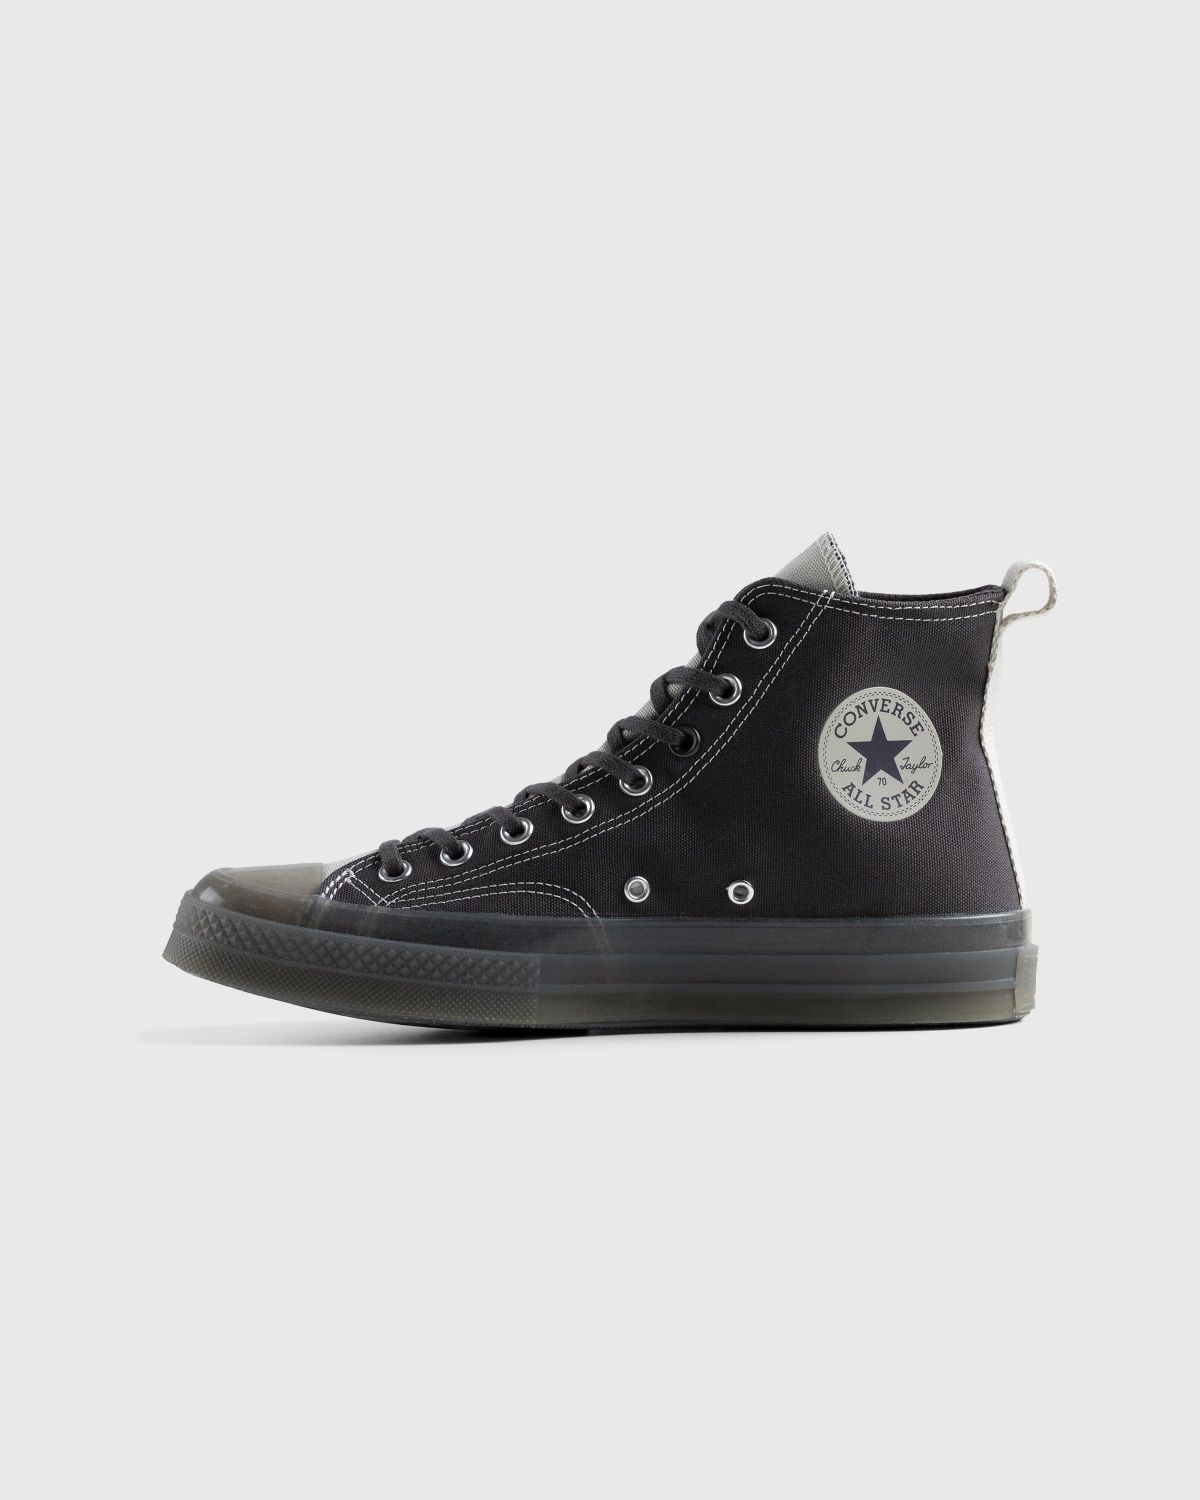 Converse x A-Cold-Wall* – Chuck 70 Hi Pavement/Silver Birch - High Top Sneakers - Black - Image 5